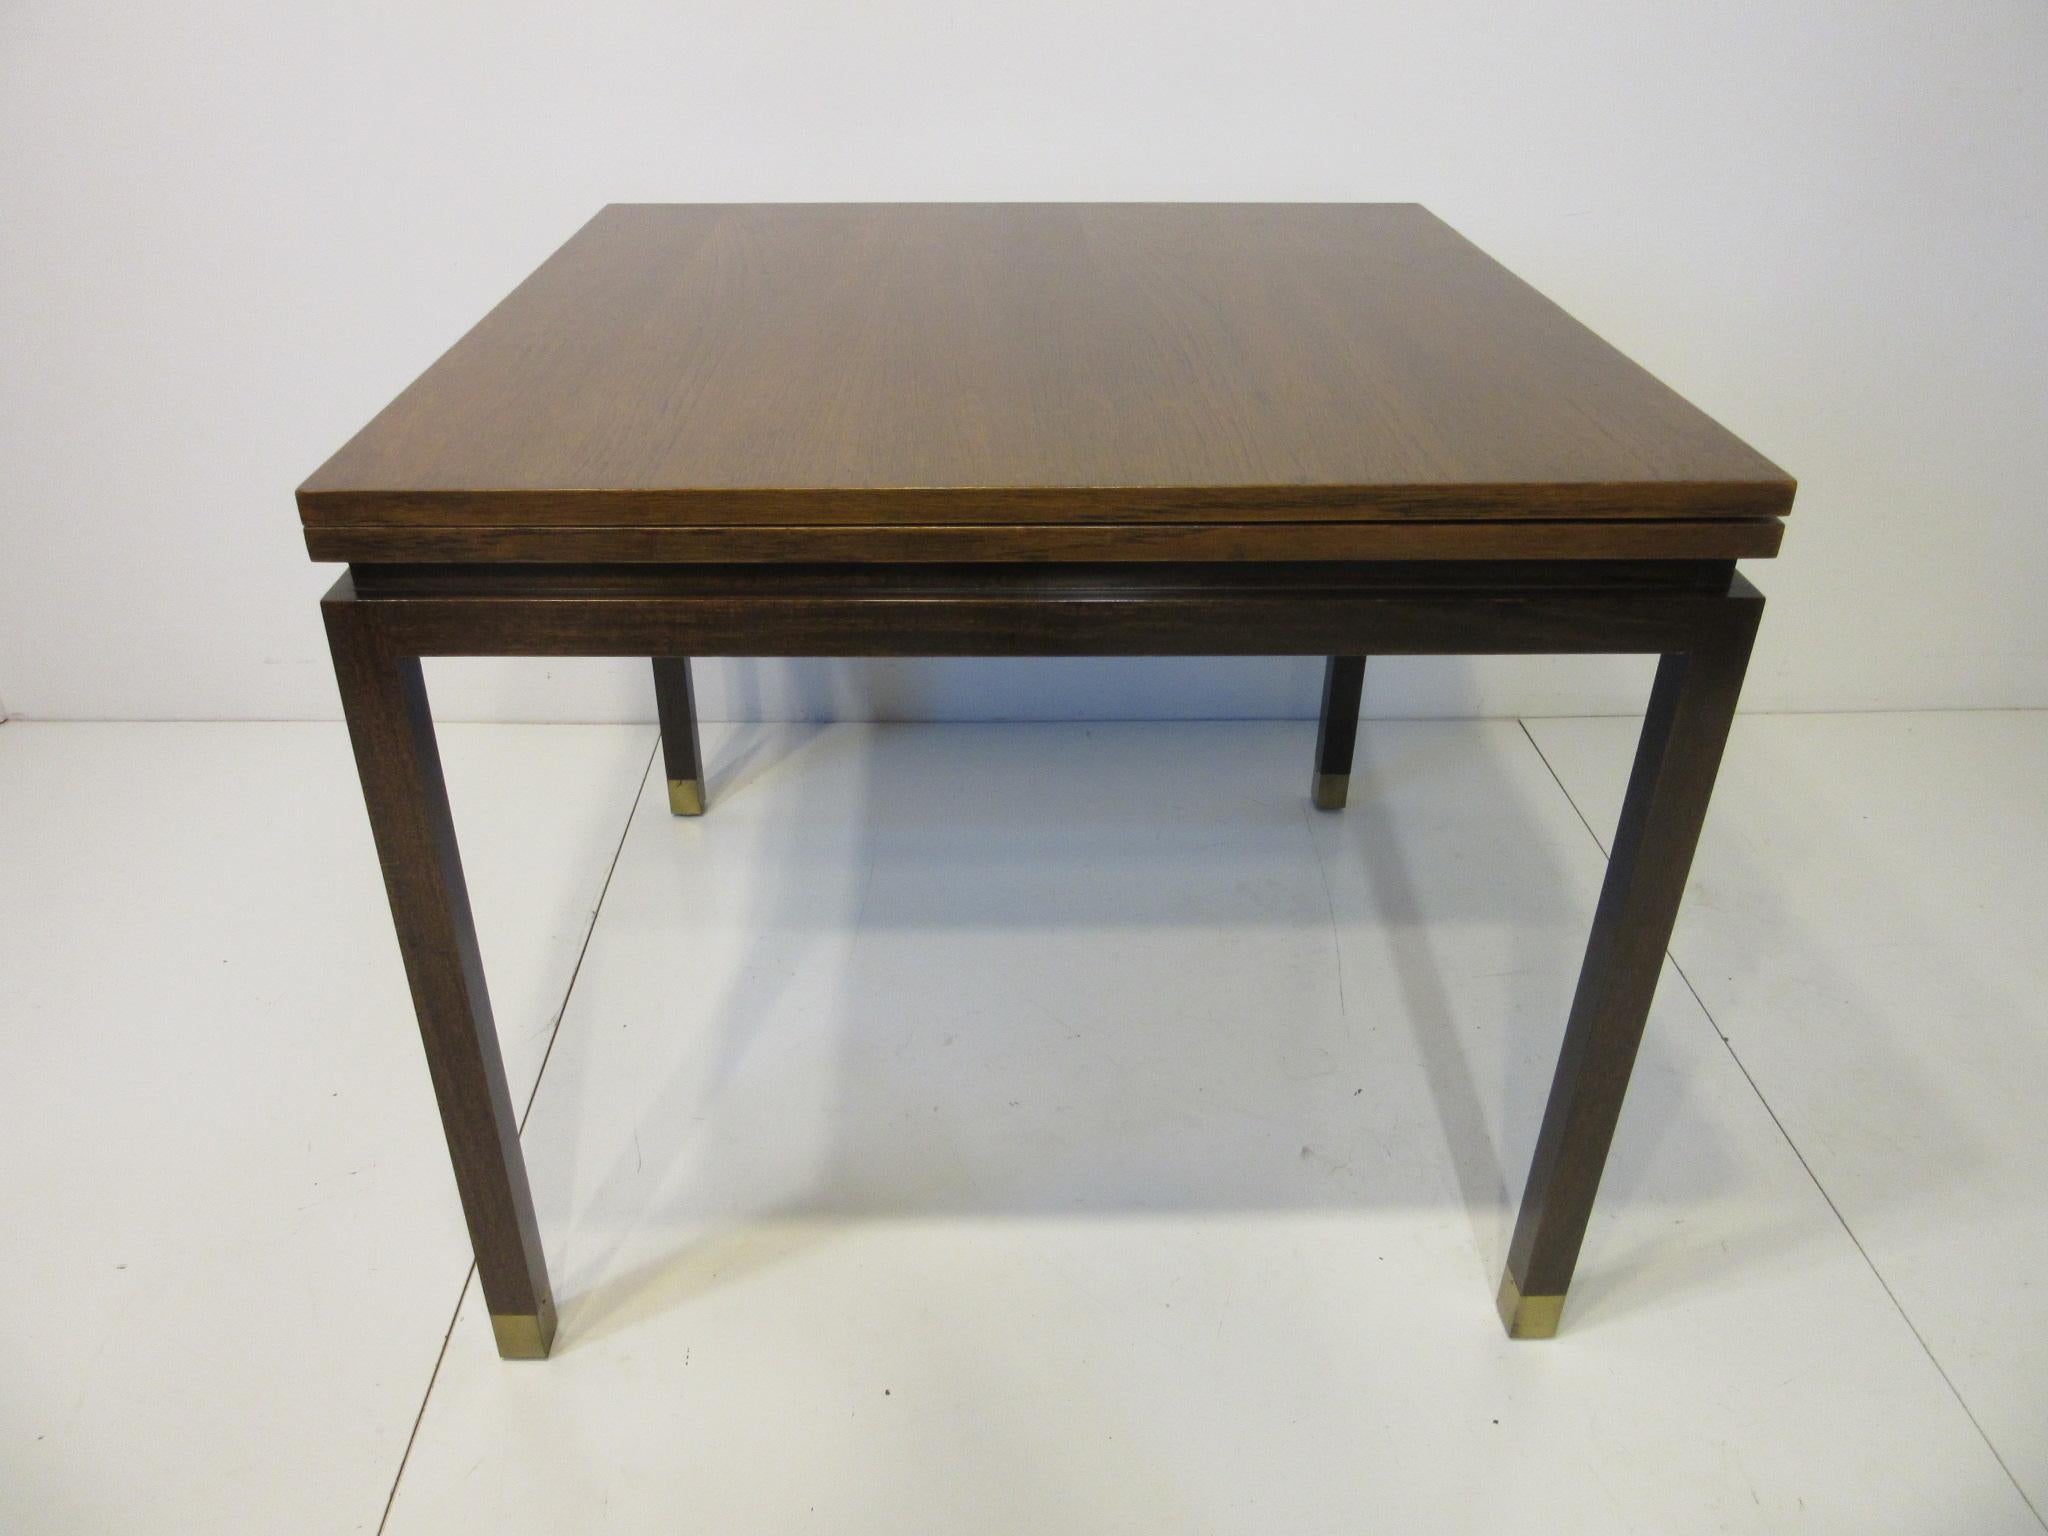 A very versatile dining / game table with a flip top that can be used in a tight or smaller sized area with the closed dimensions of the top at 34